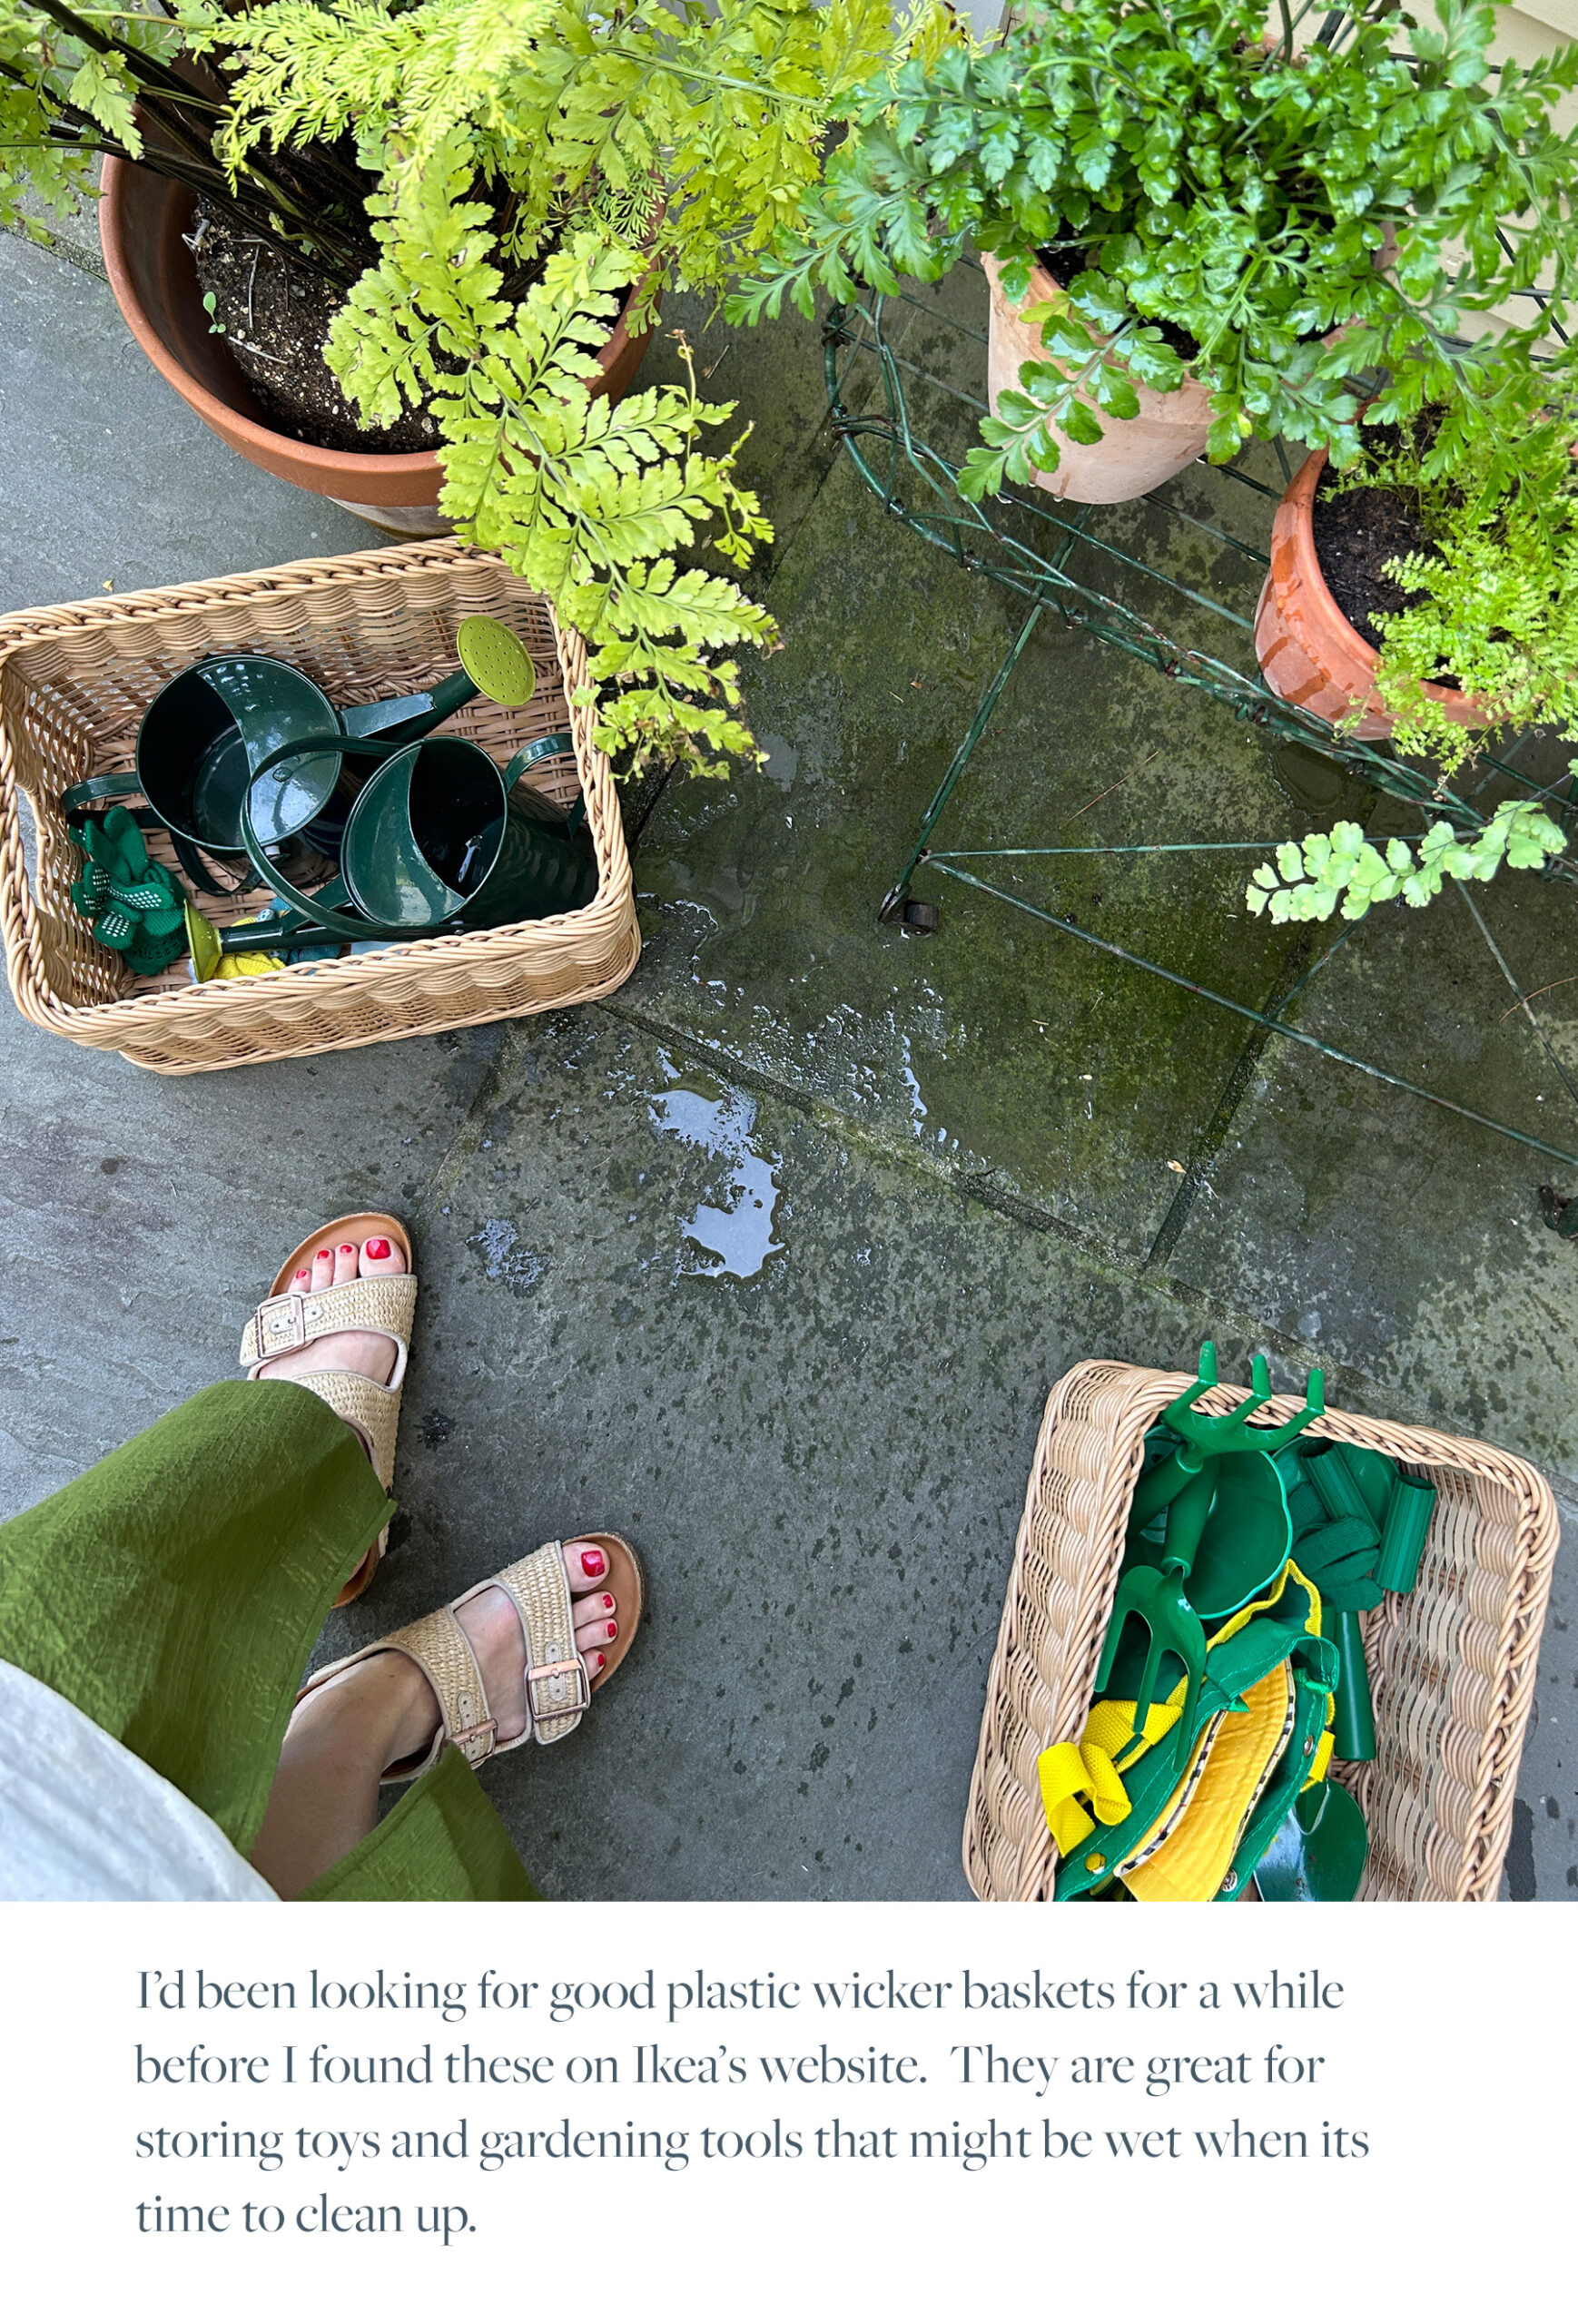 I’d been looking for good plastic wicker baskets for a while before I found these on Ikea’s website. They are great for storing toys and gardening tools that might be wet when its time to clean up.